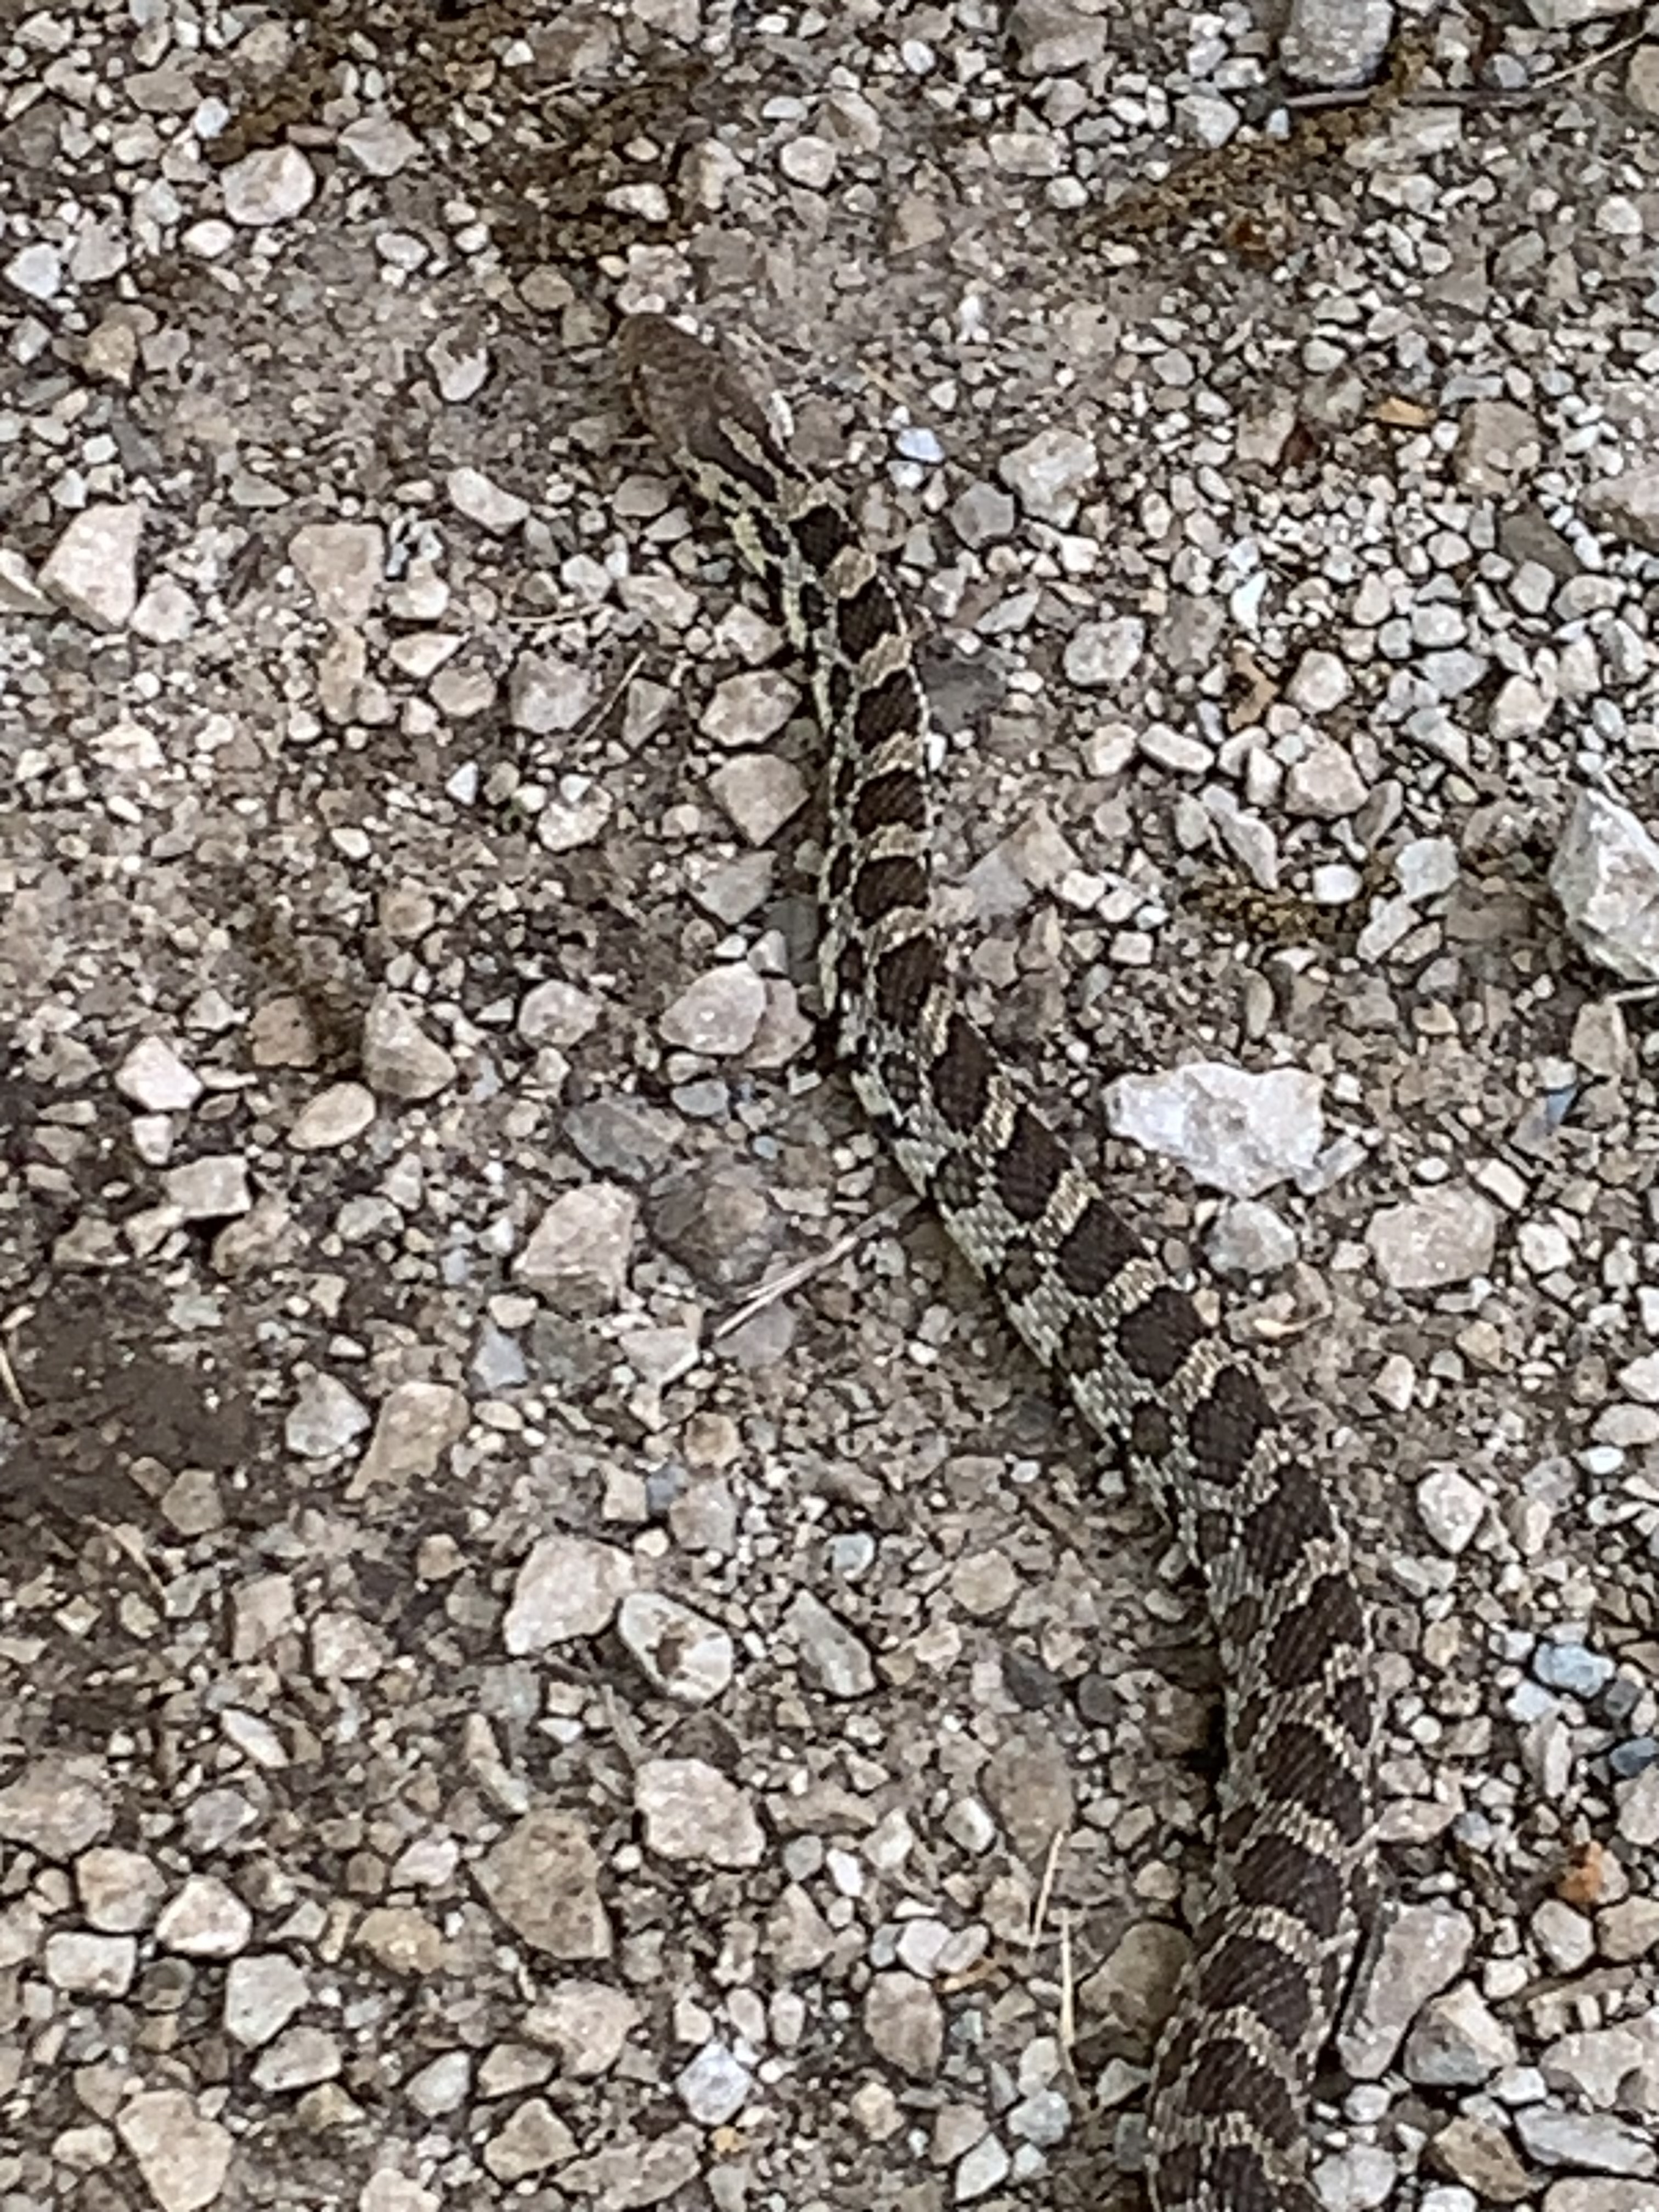 A tan snake with repeating brown-black blotches moves across a gravel surface, heading for cover.